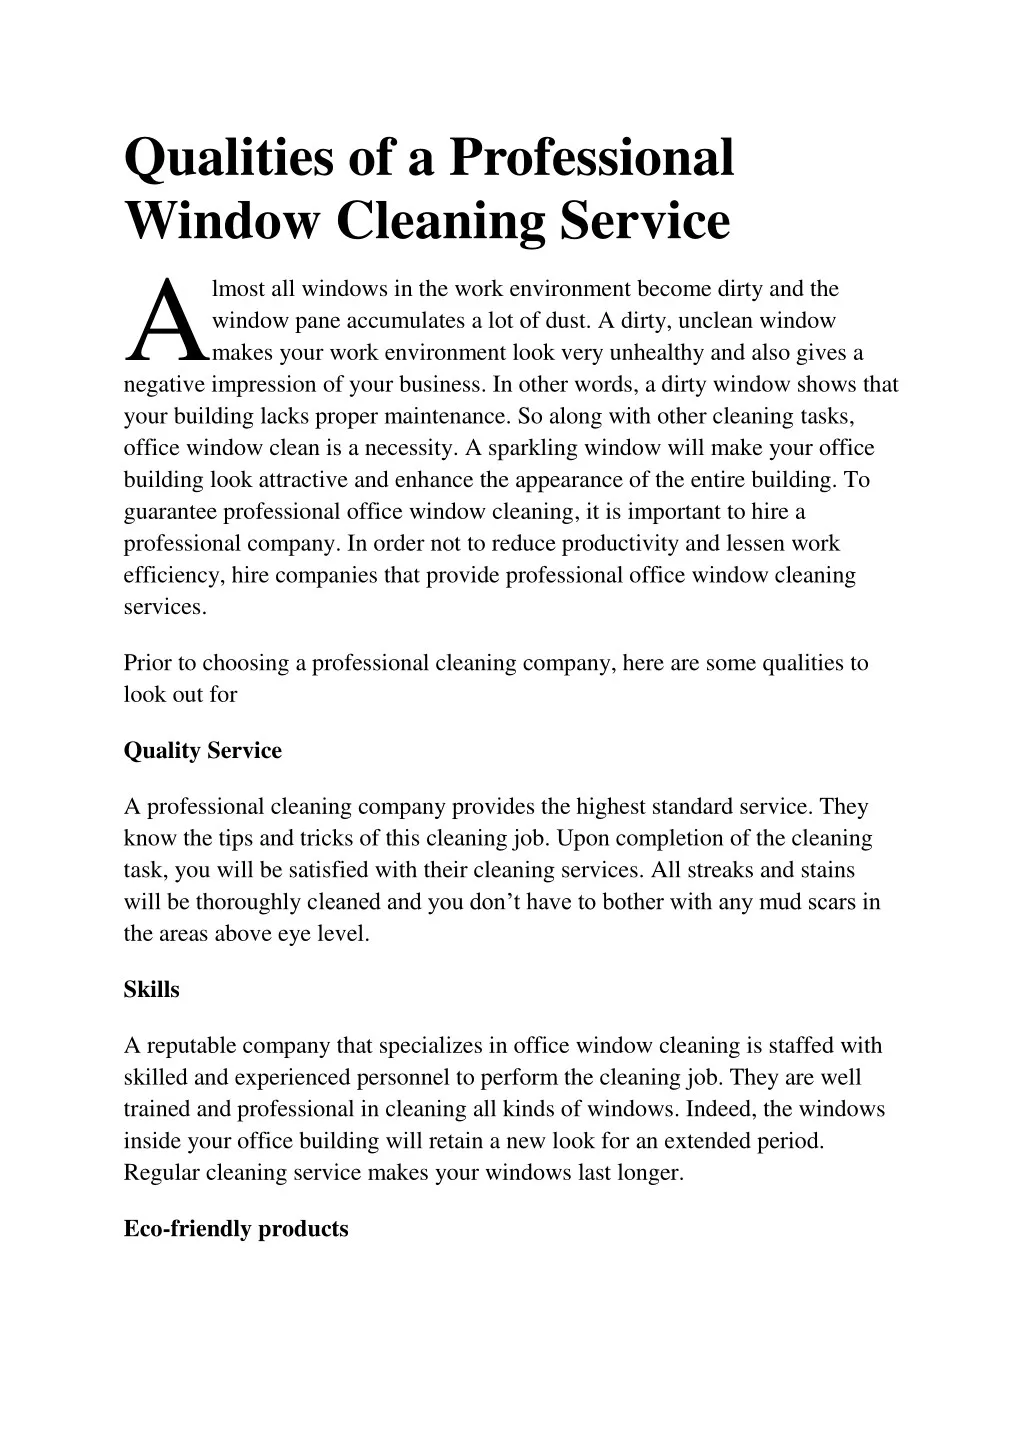 qualities of a professional window cleaning